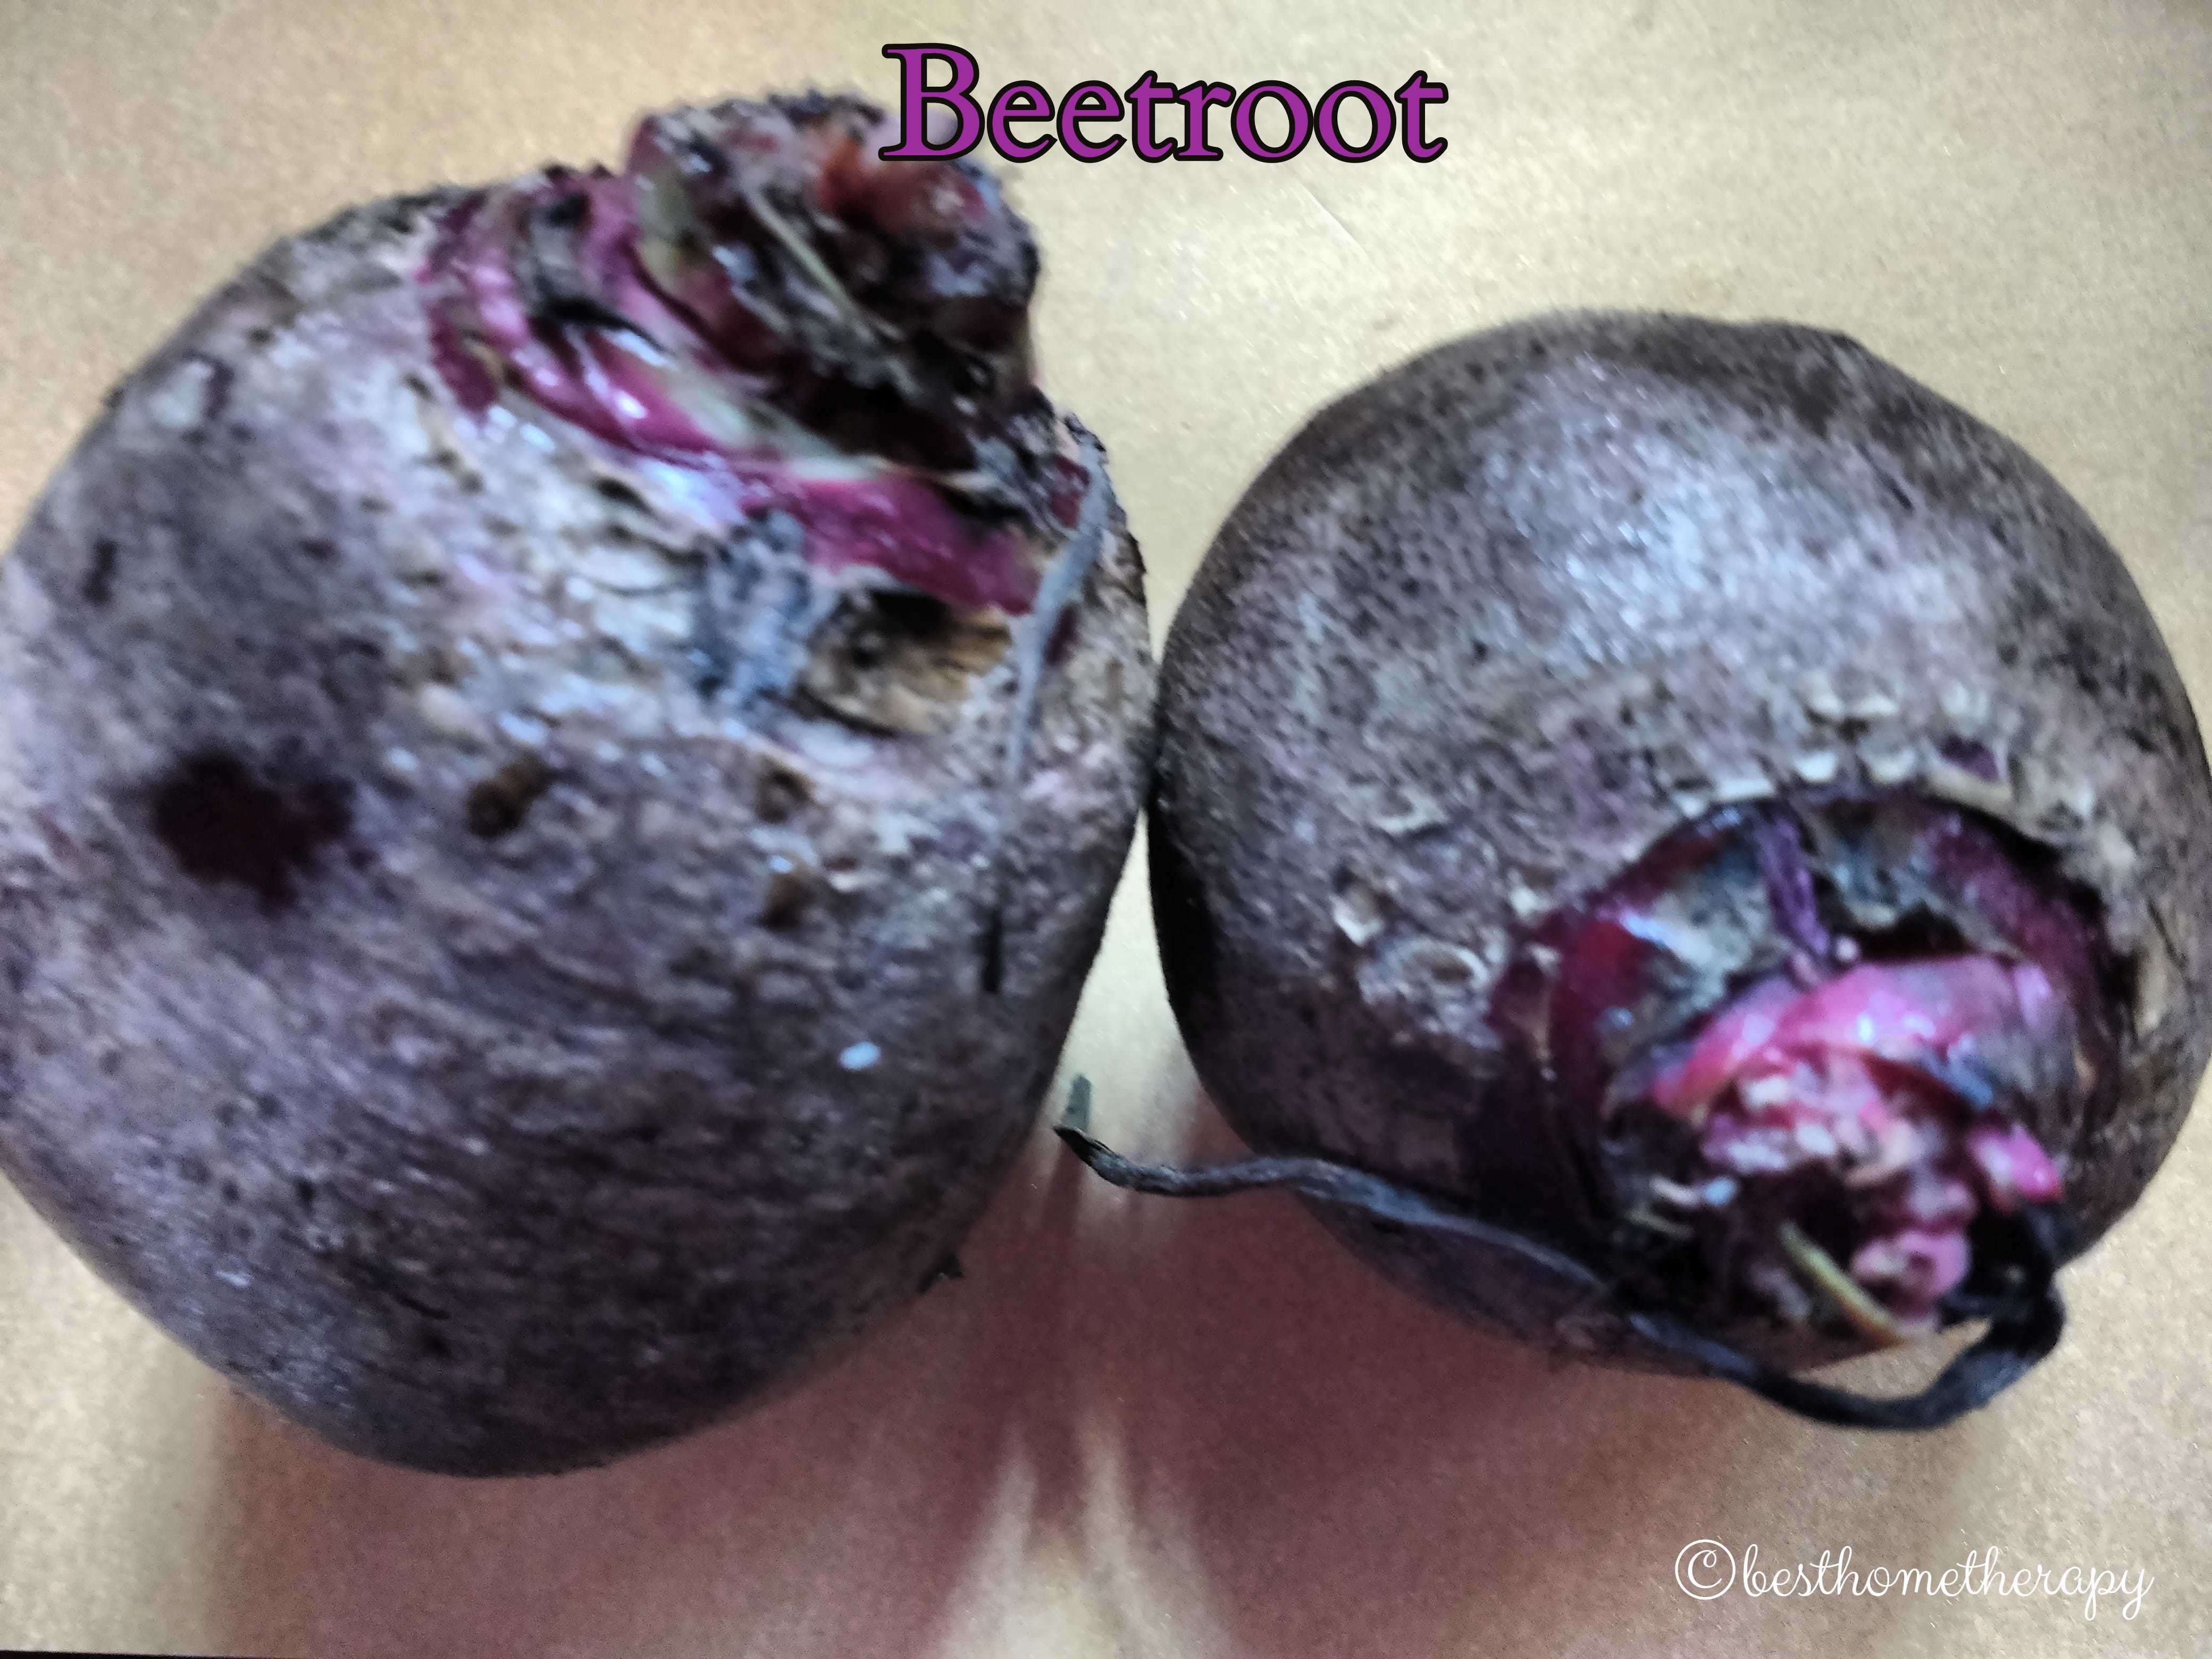 Beetroot for Hair: Benefits, Side Effects, How to Use – Traya